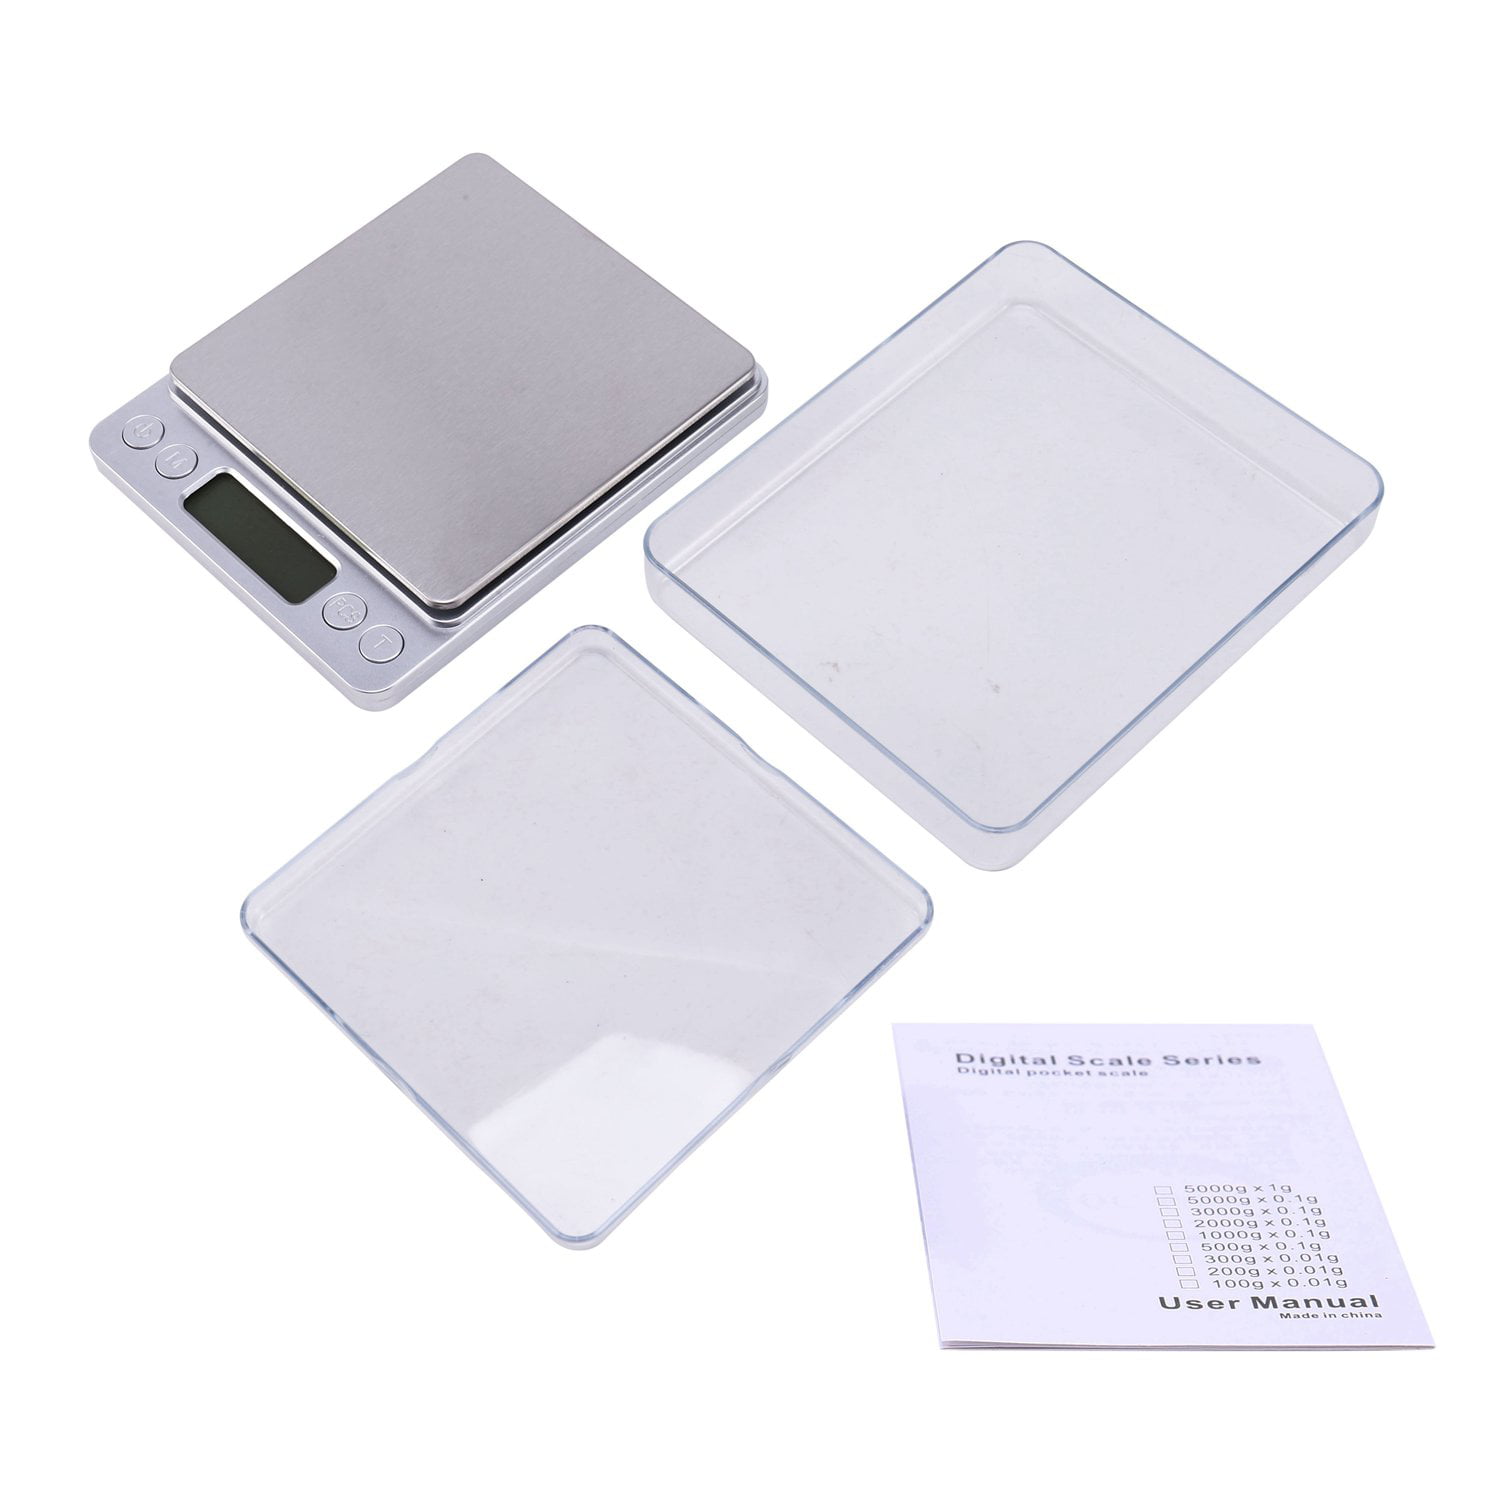 Digital Scale 3000g x 0.1g Jewelry Gold Silver Coin Gram Pocket Size Herb Grain 